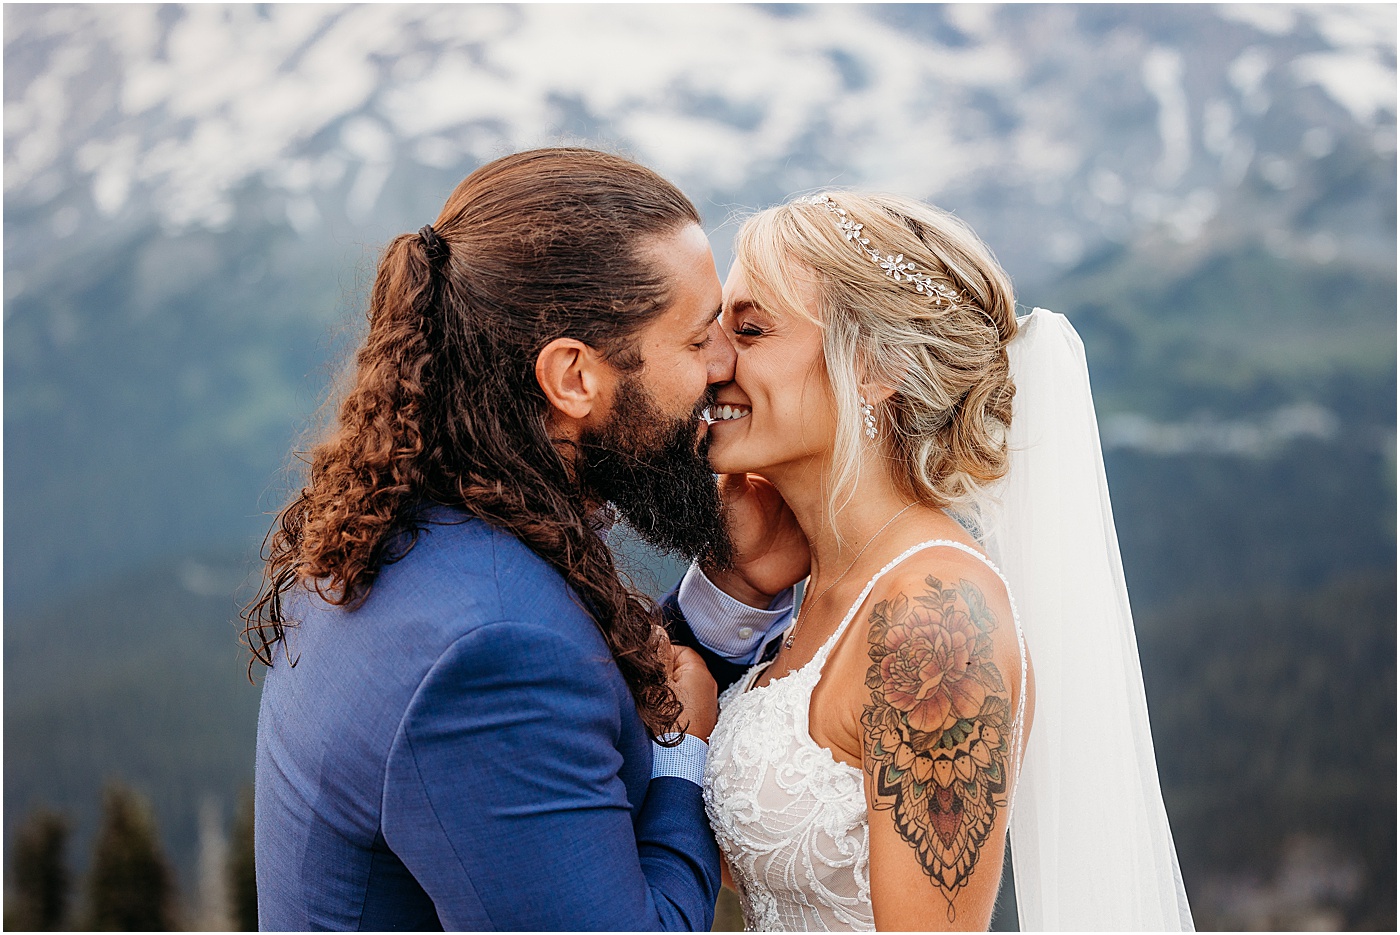 Bride and groom kissing | Photo by Megan Montalvo Photography